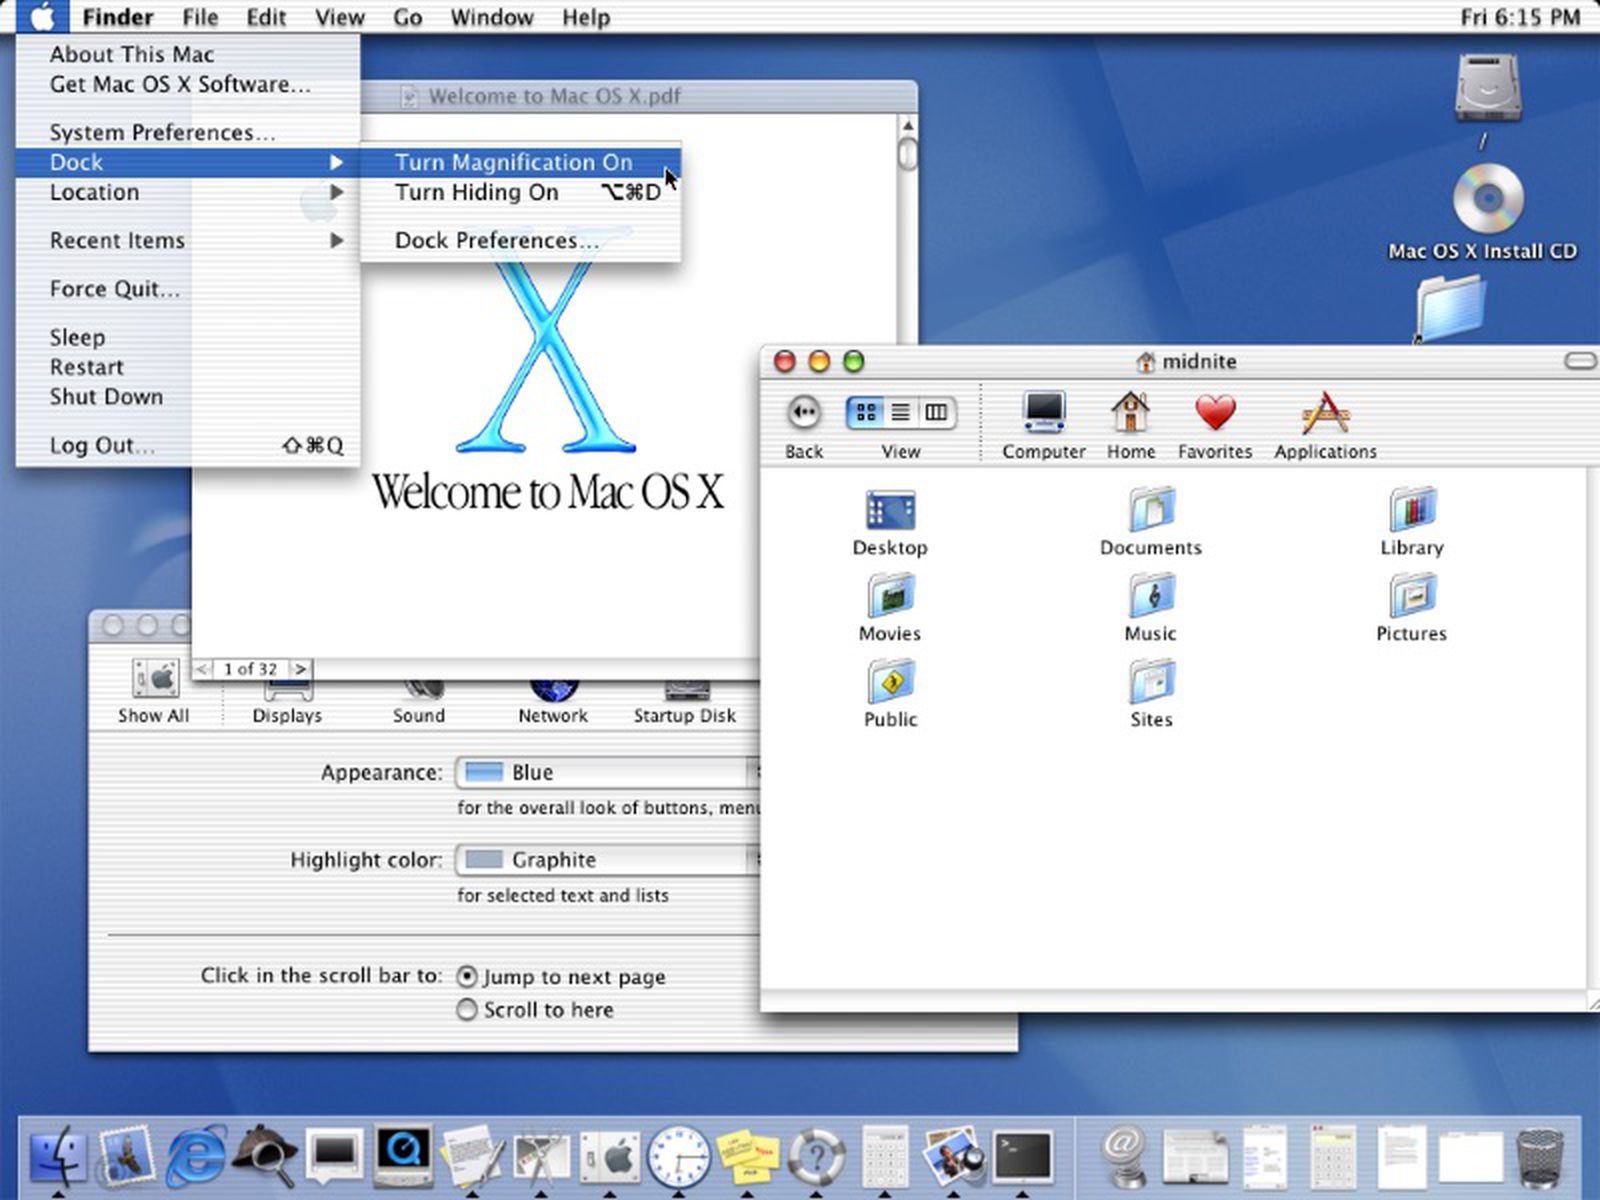 Today marks 20 years since Mac OS X was first launched